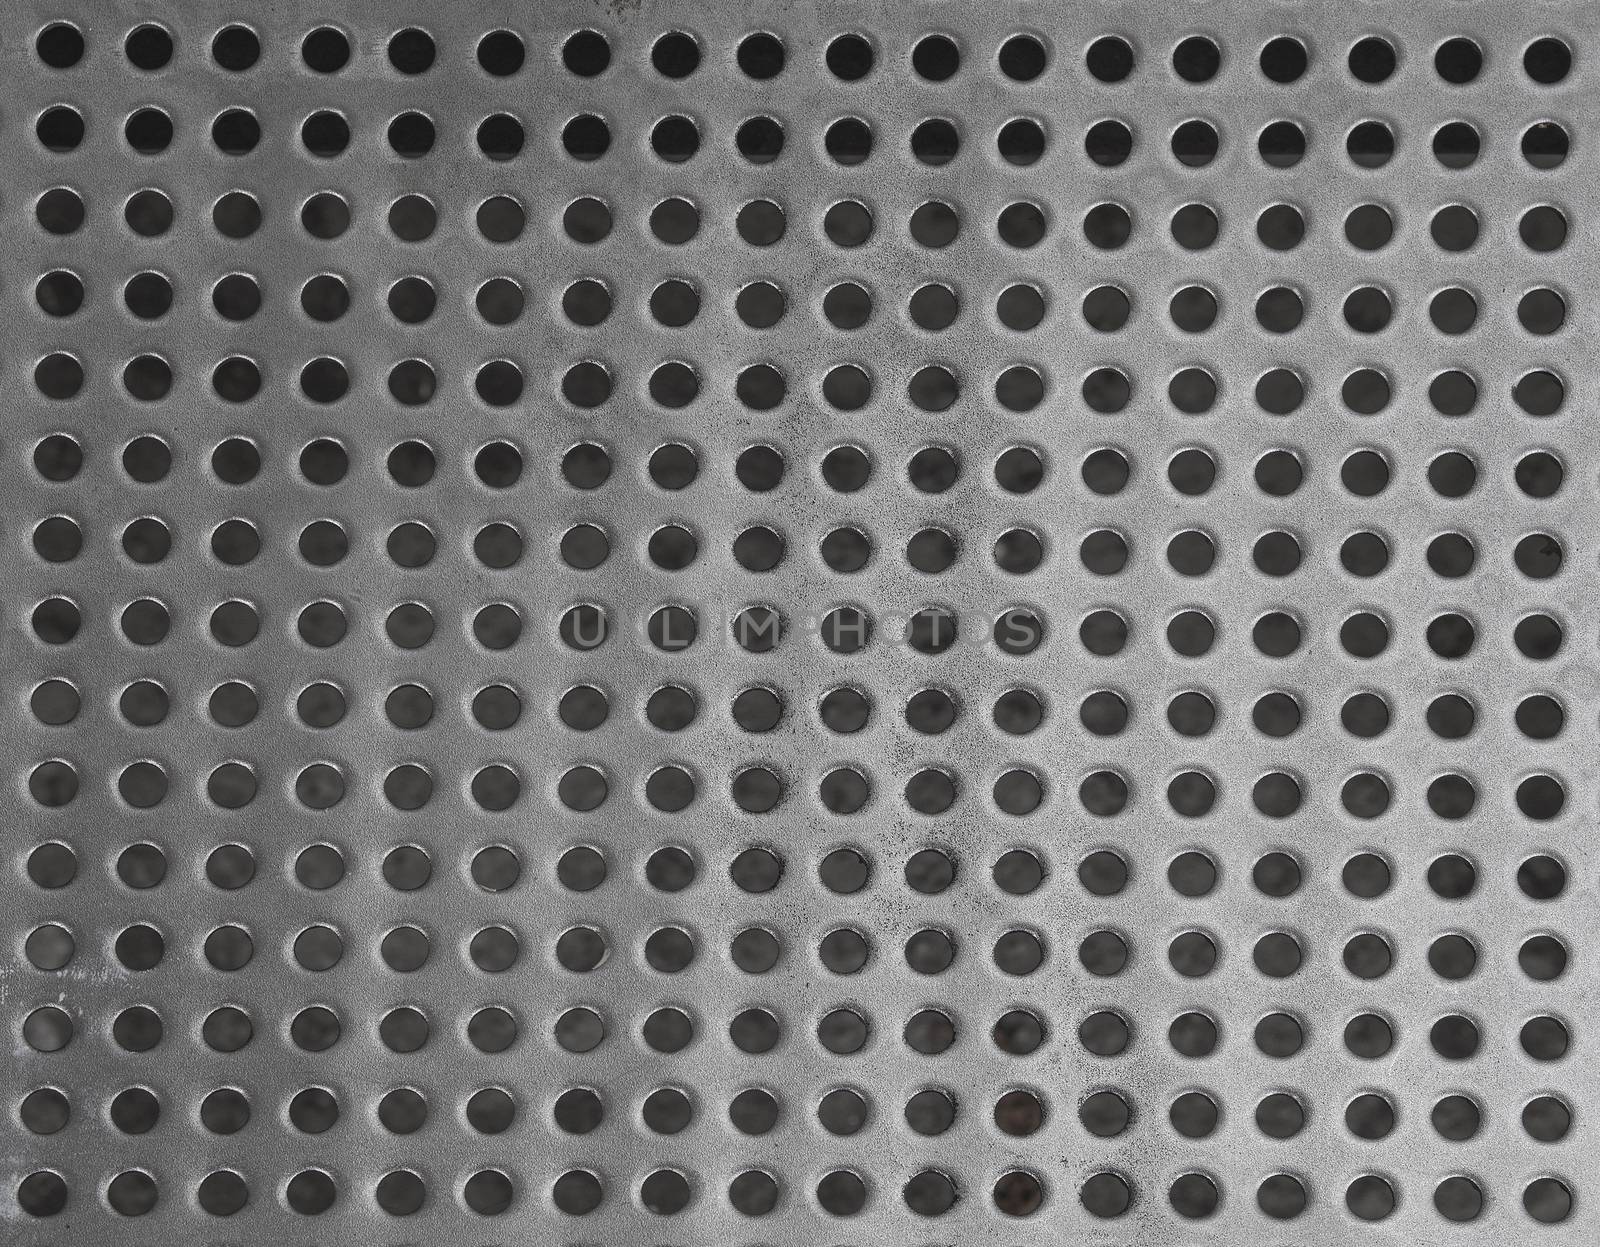 iron stainless steel grating with small regular circle shaped holes black and white geometric background